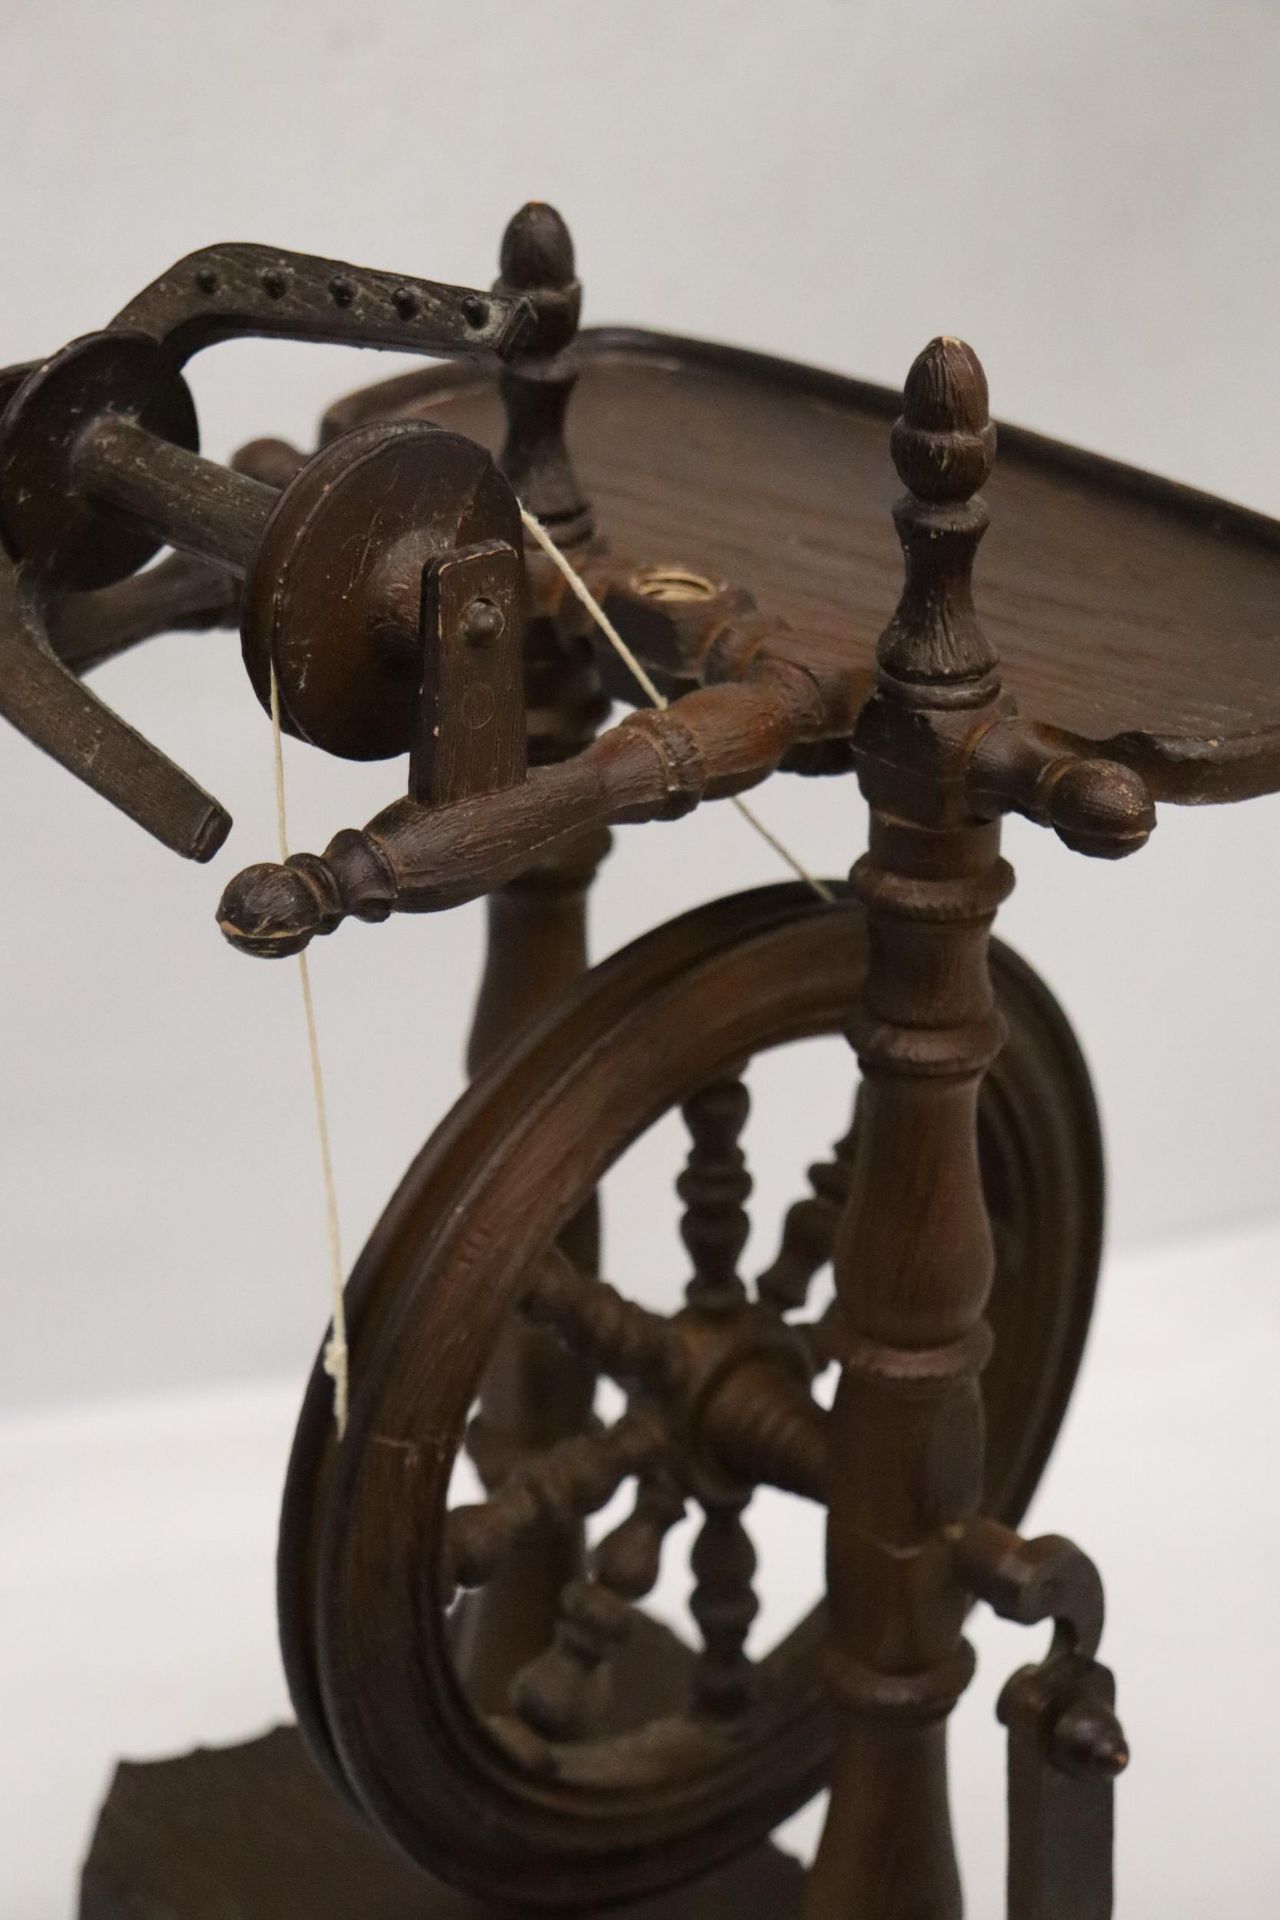 A SMALL VINTAGE WOODEN SPINNING WHEEL, HEIGHT APPROX 42CM - Image 5 of 5